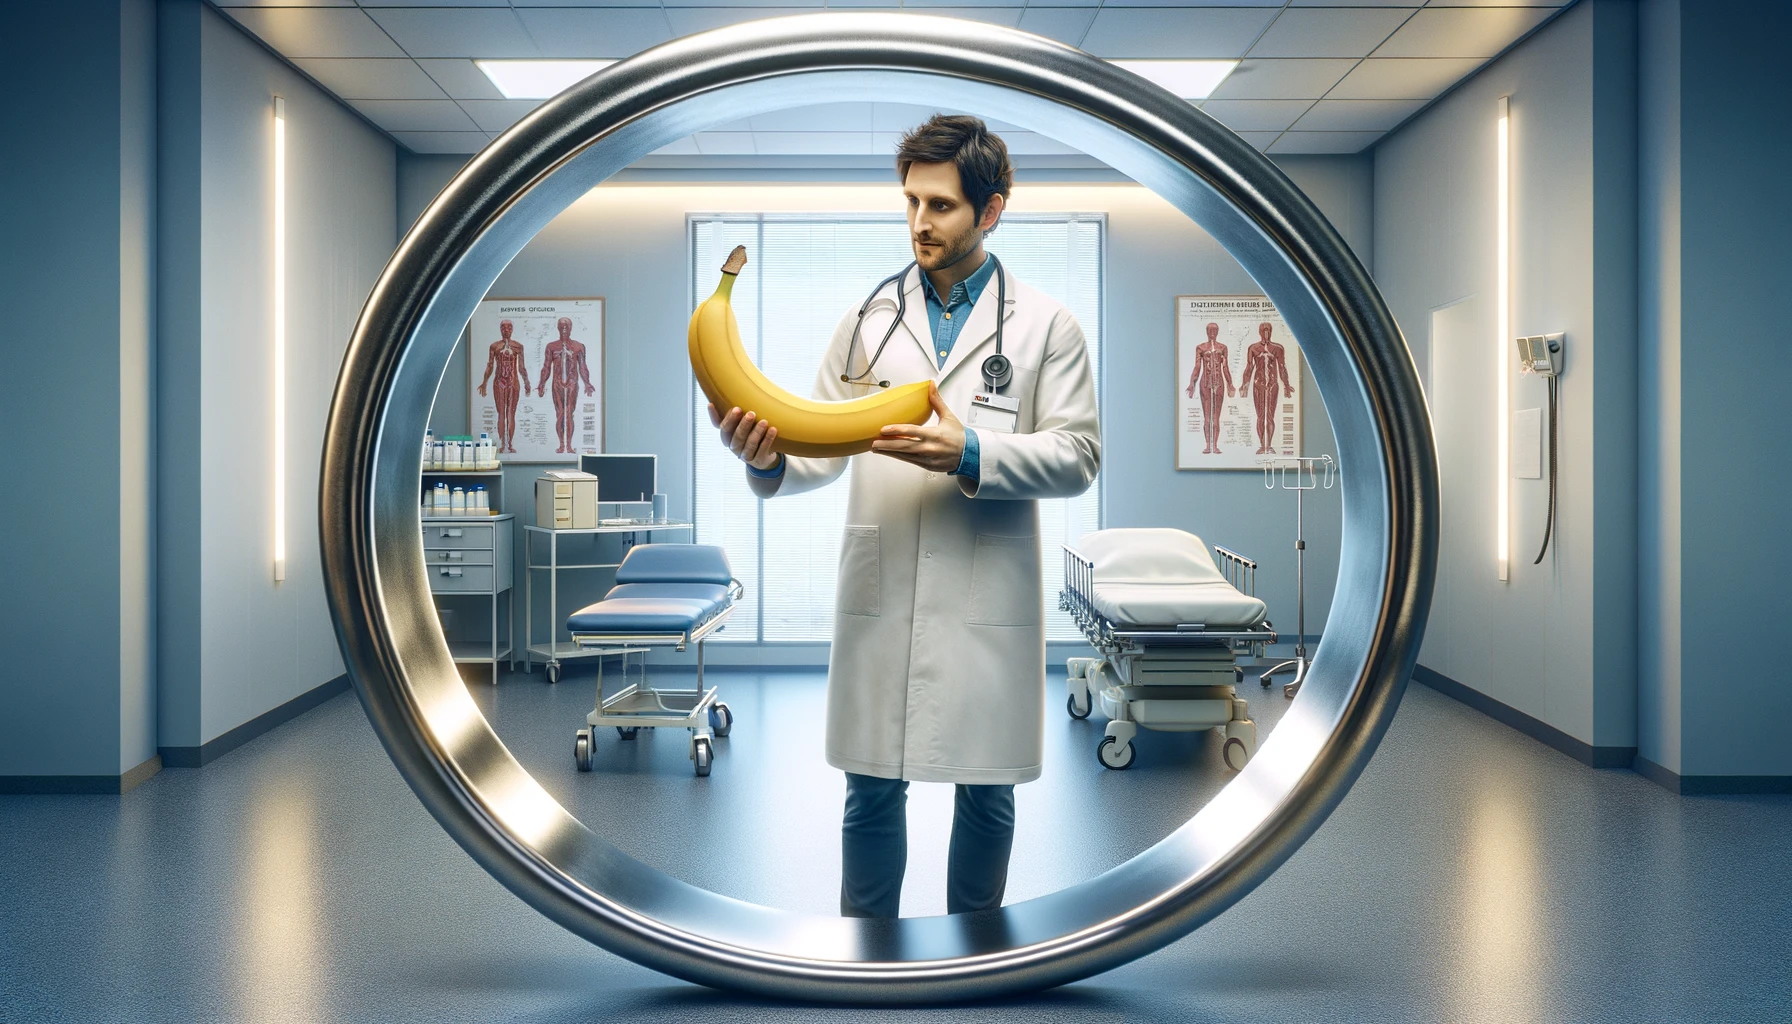 doctor standing inside a large ring. The doctor, wearing a white coat and a stethoscope around their neck, is holding a banana